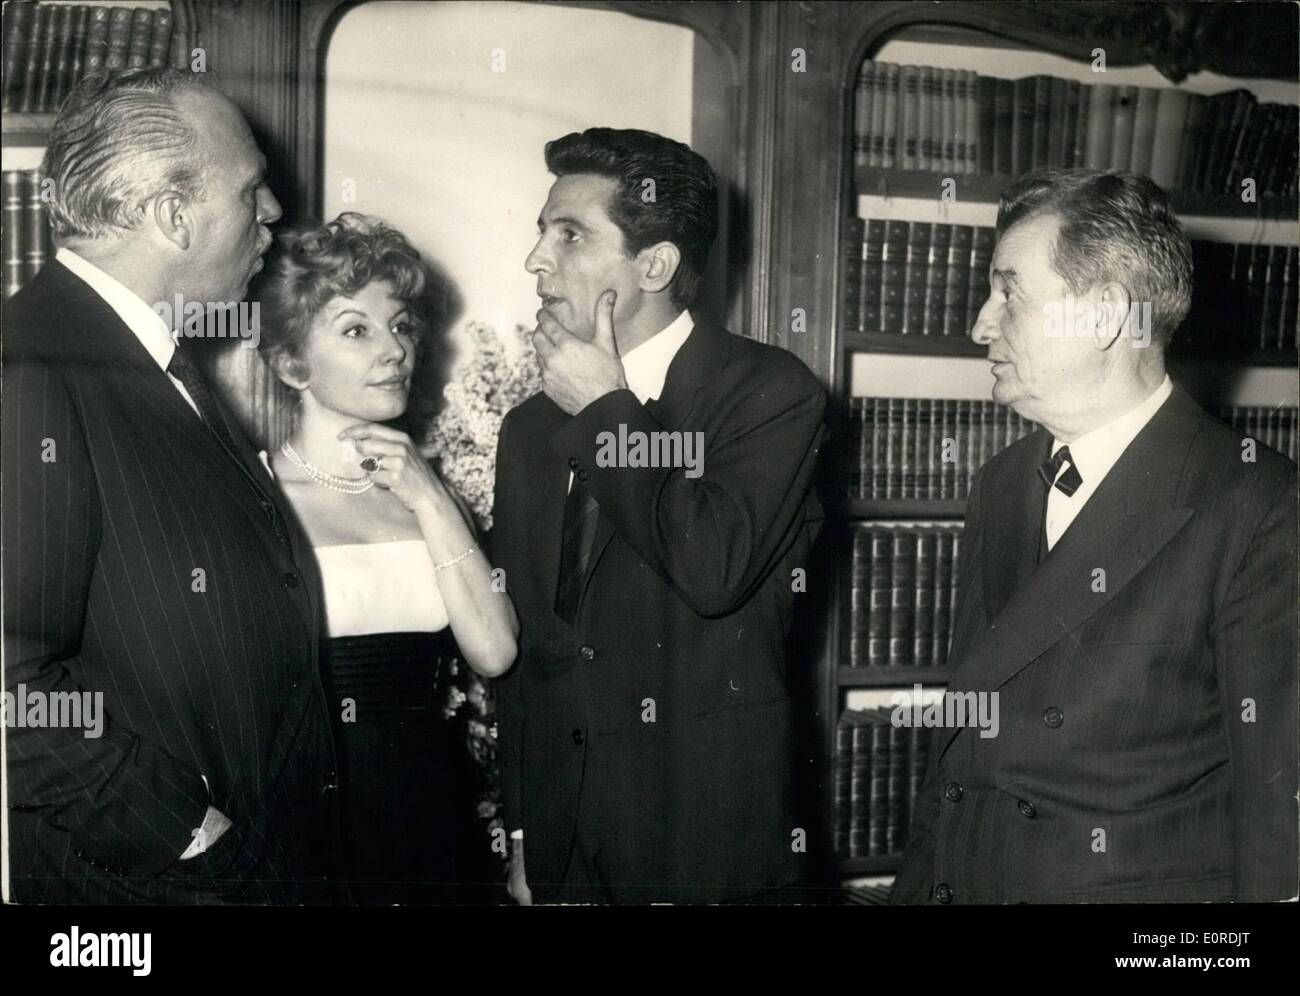 Feb. 02, 1959 - American Film Producer Plans Re-mark on Pagnol's Famous Trilogy: Joshua Logan, the famous American Fil Producer, is now in Paris to make arrangements for a re-make of Marcel Pagnol's famous trilogy ''Marius'', ''Emmy'' and ''Cesar''. Gilbert Becaud, the successful French Singer-composer and actor, has been proposed the Pagnol to play the role of Marius. Photo Shows Marcel Pagnol (right) introducing Gilbert Becaud (center) to Joshua Logan during the American Producer's visit to Pagbol's Paris home Stock Photo